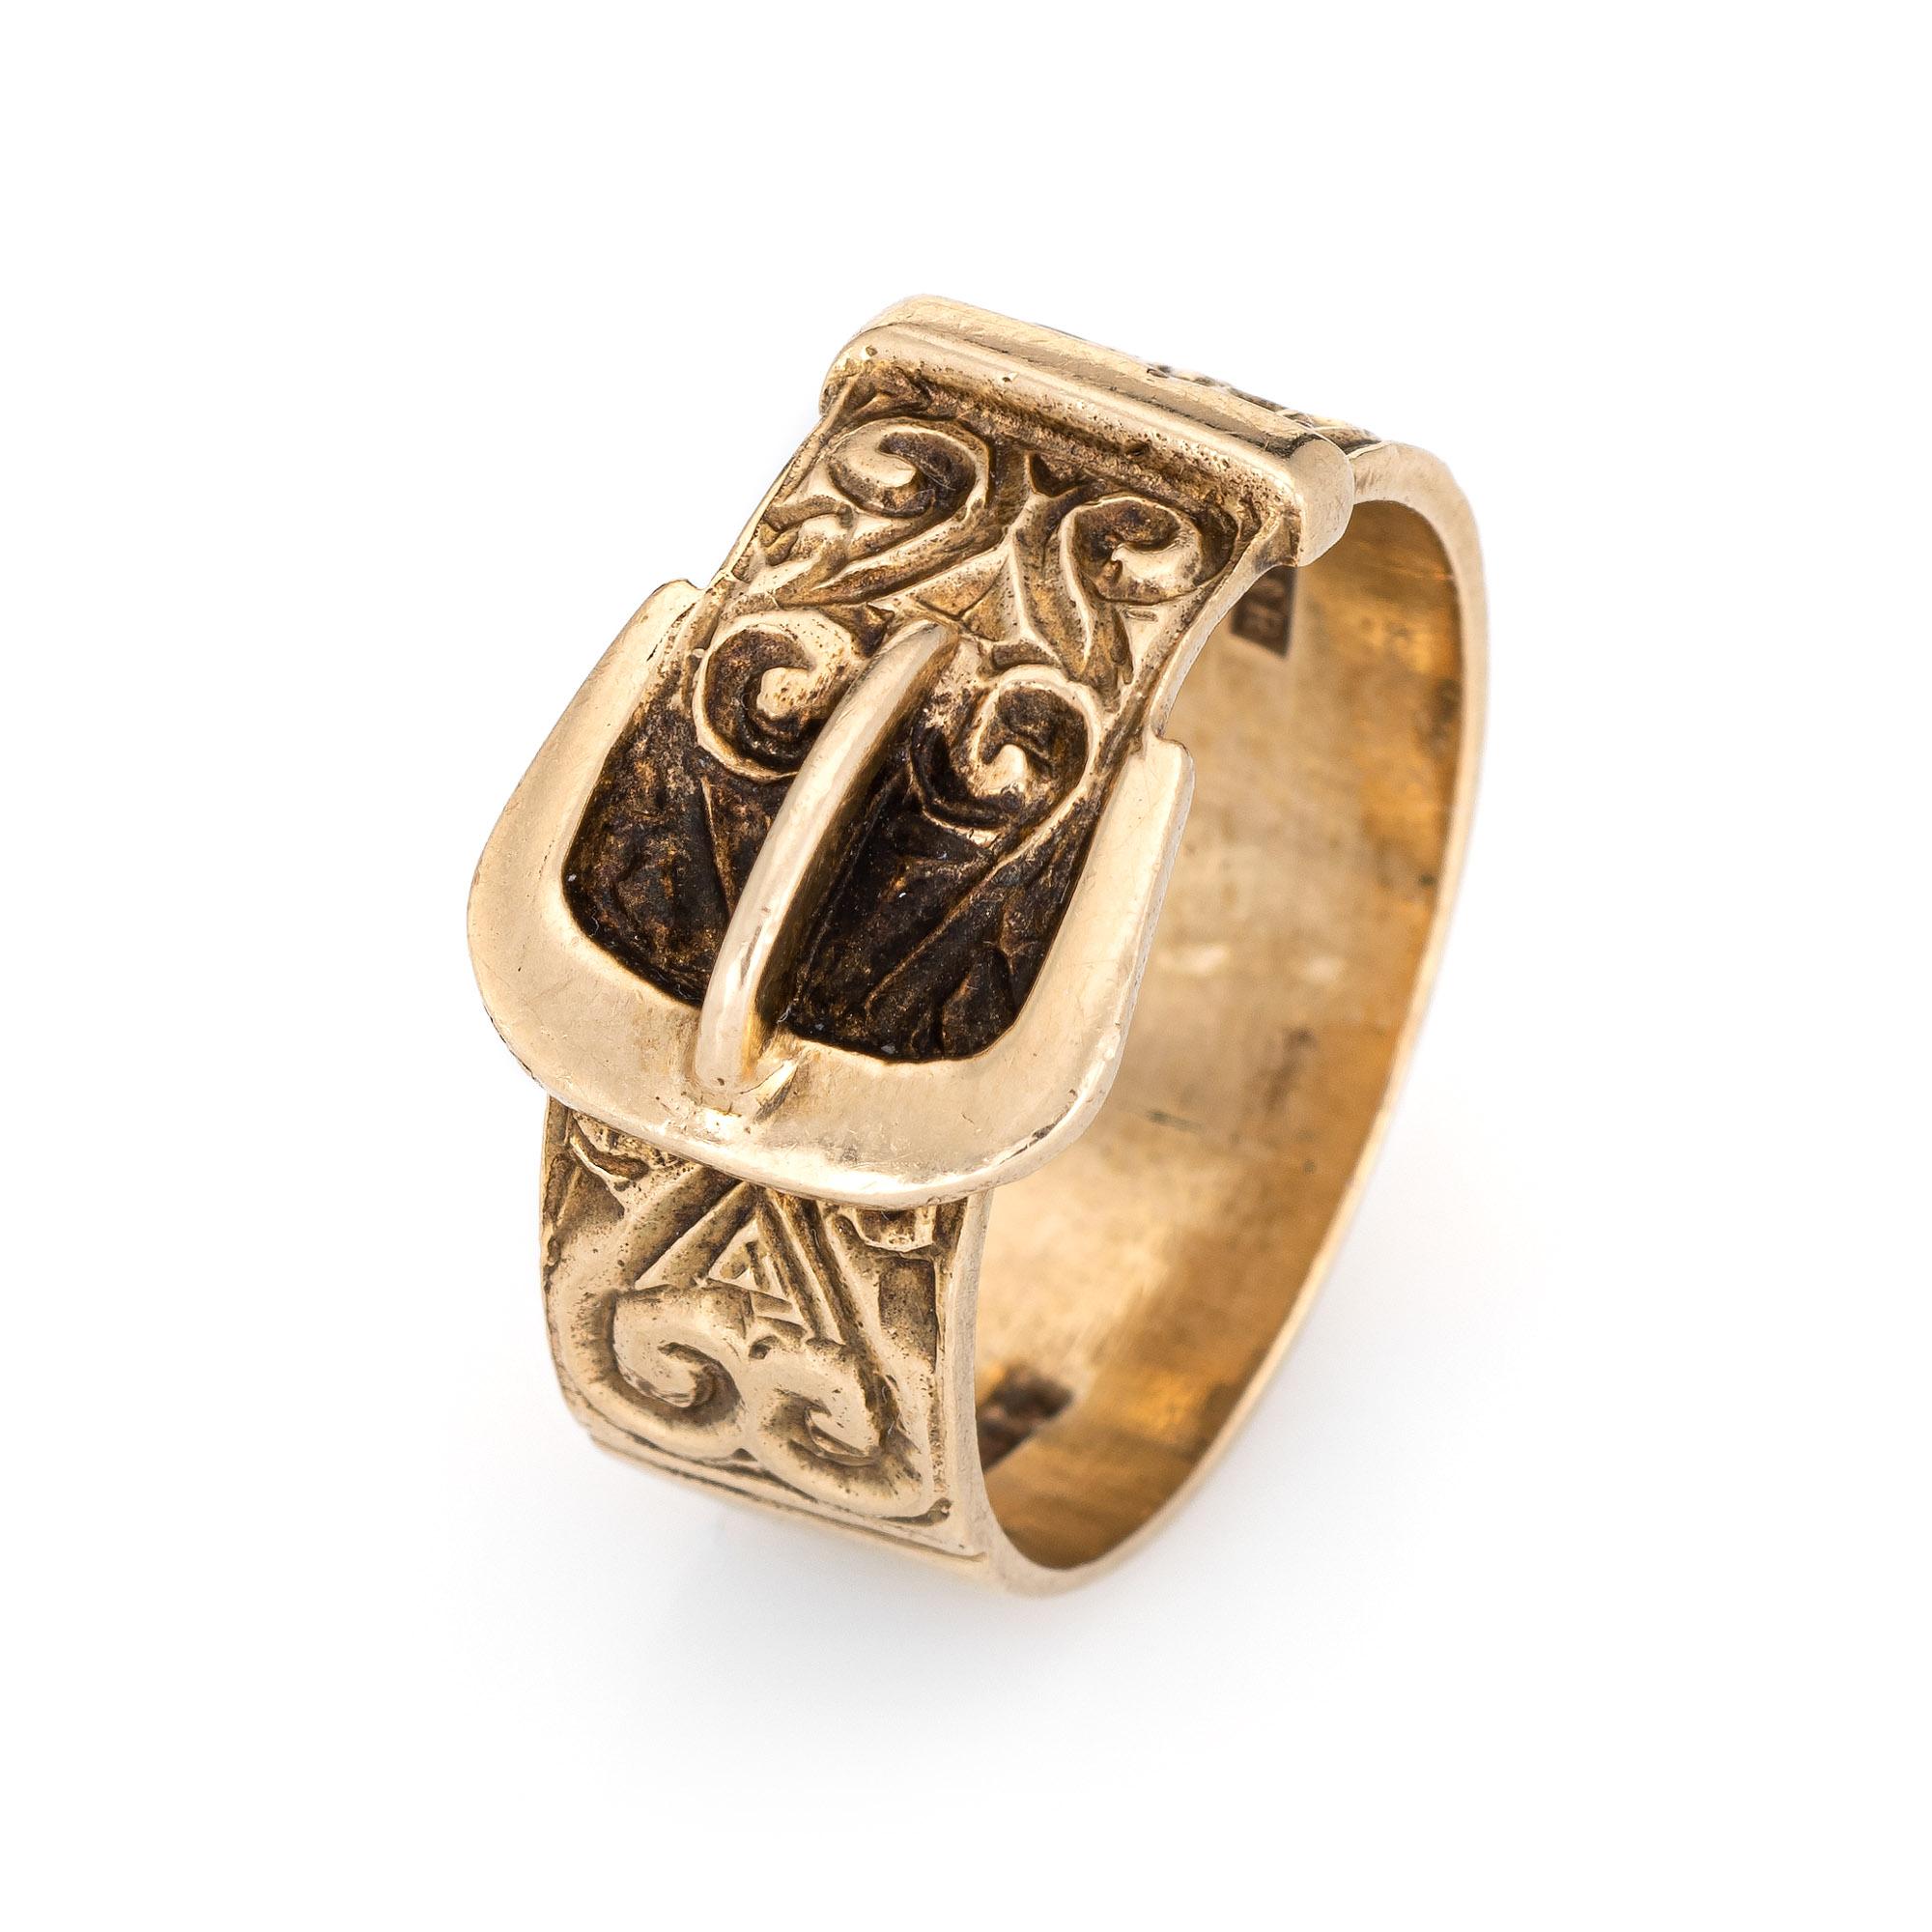 Stylish vintage buckle ring (circa 1970) crafted in 9 karat rose gold. 

The buckle ring features etched scrolled detail with a romantic heart shaped motif to one end. The buckle ring is a popular design, representing the joining of two lives